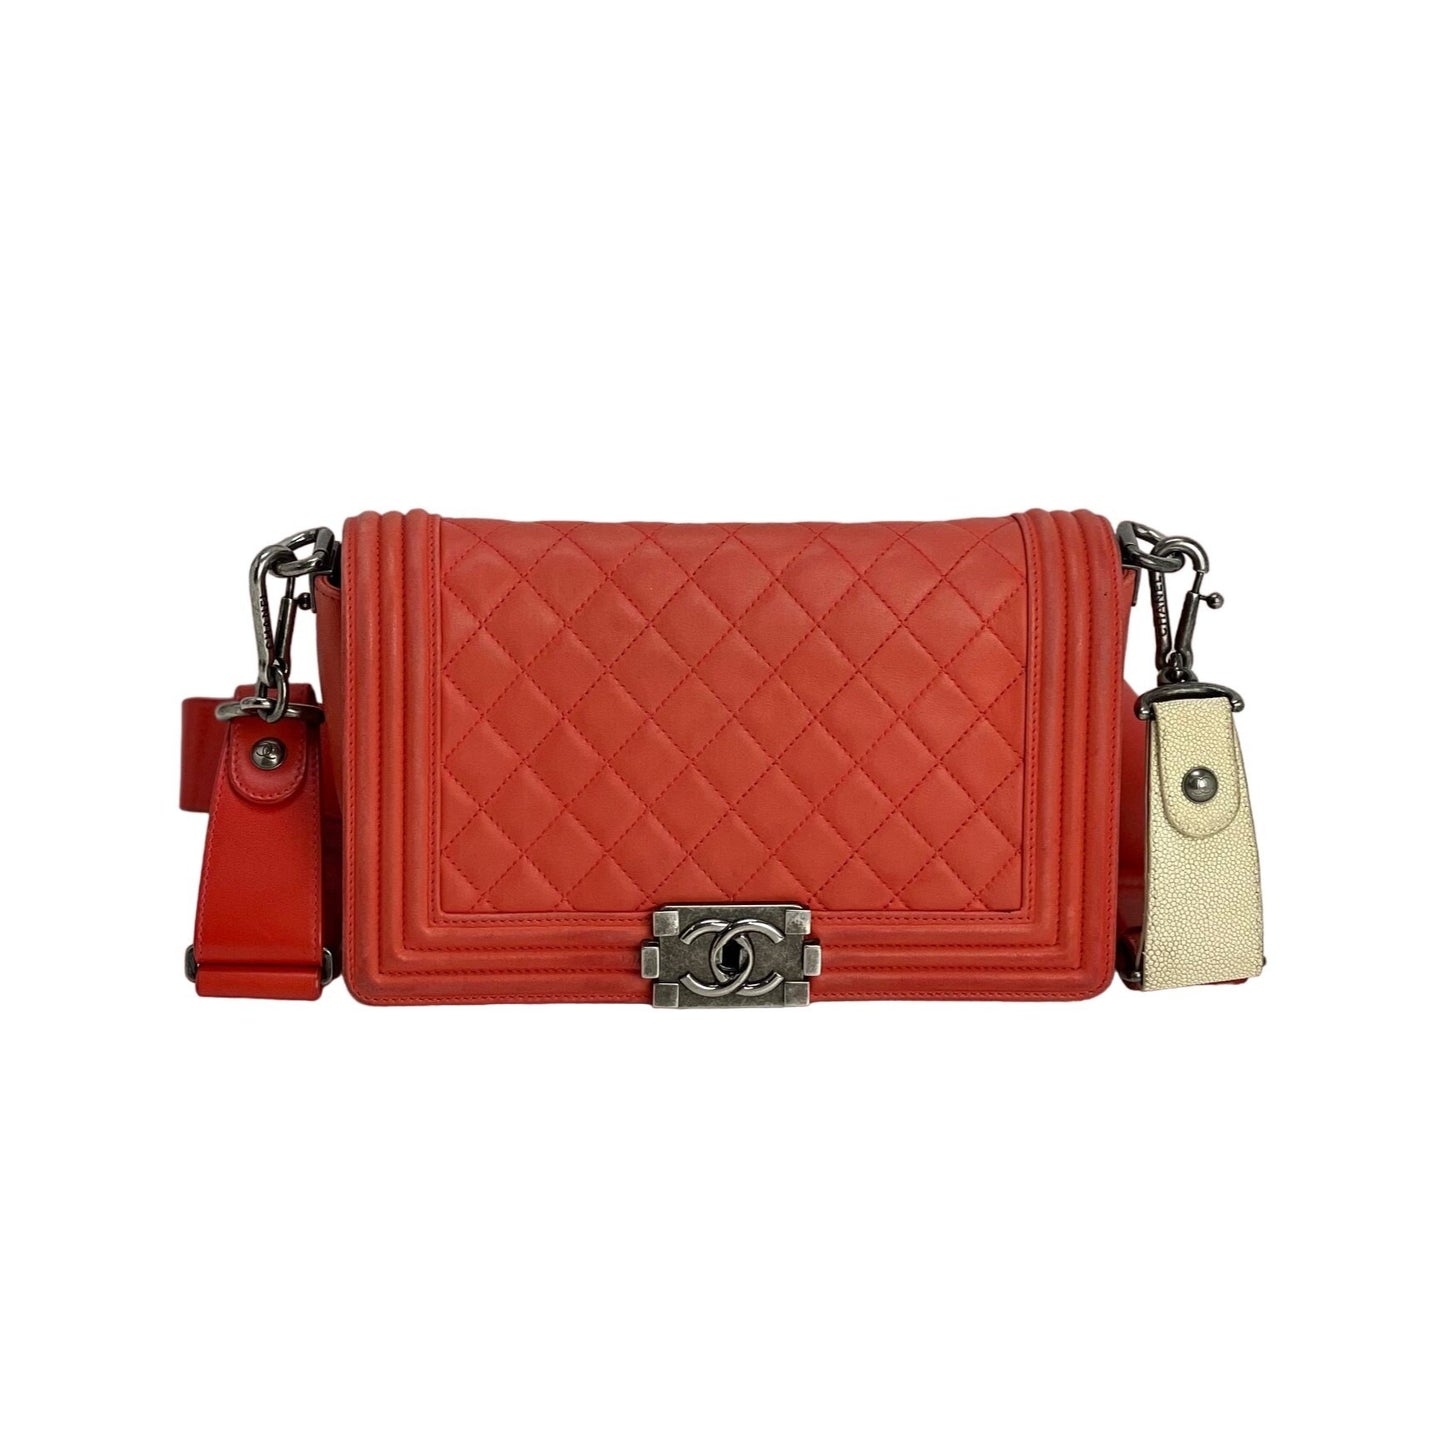 Chanel Lambskin Quilted Medium Boy Red Flap Bag